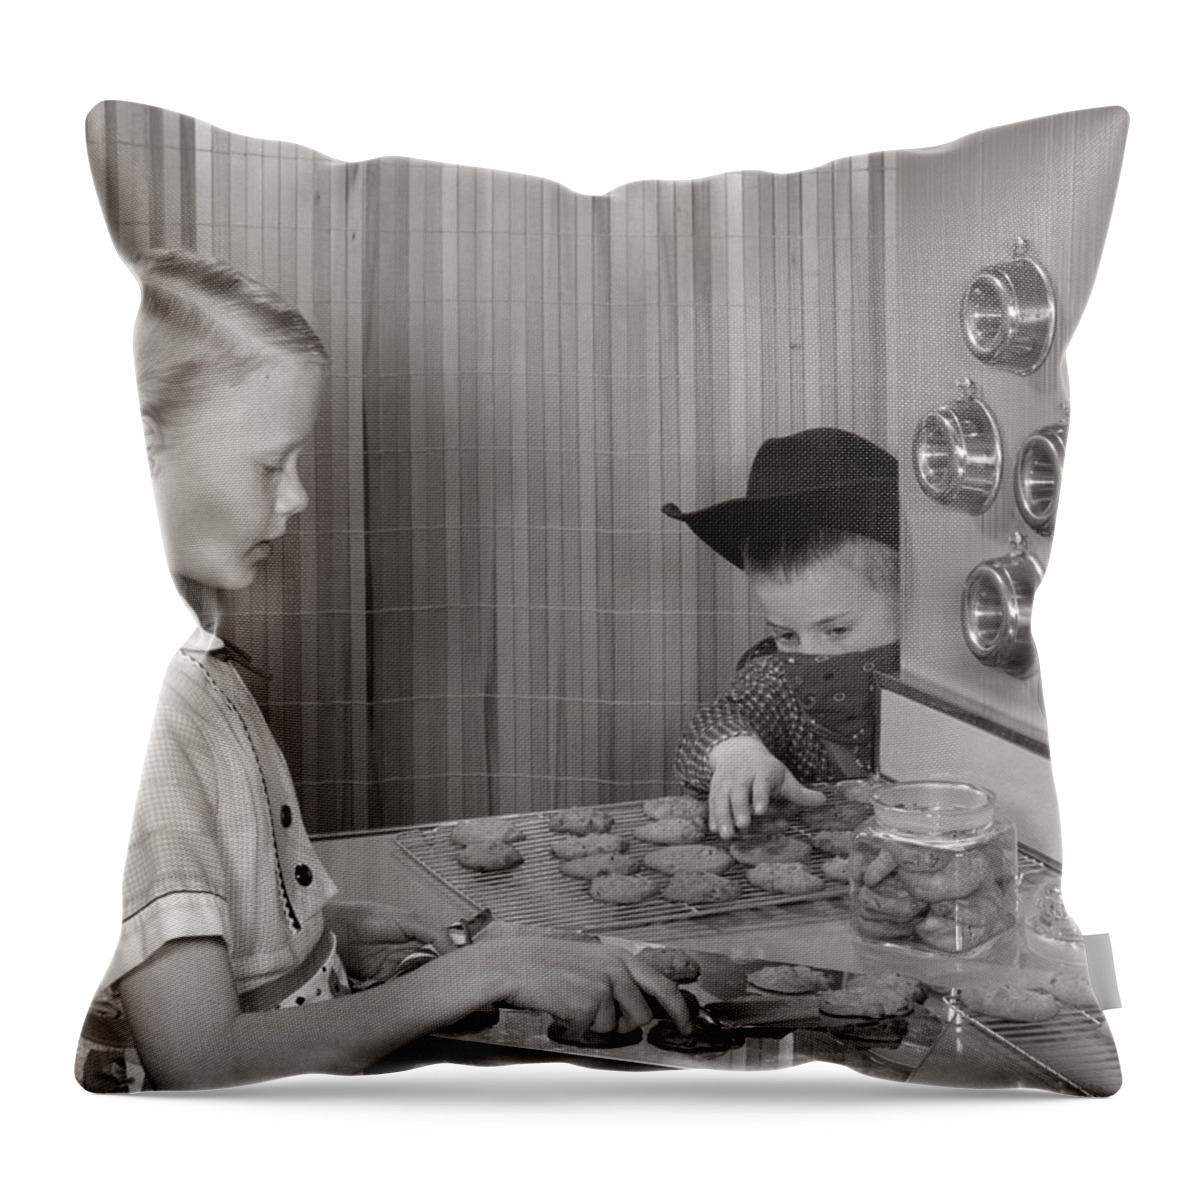 1960s Throw Pillow featuring the photograph Brother Stealing Sisters Cookies by L. Fritz/ClassicStock